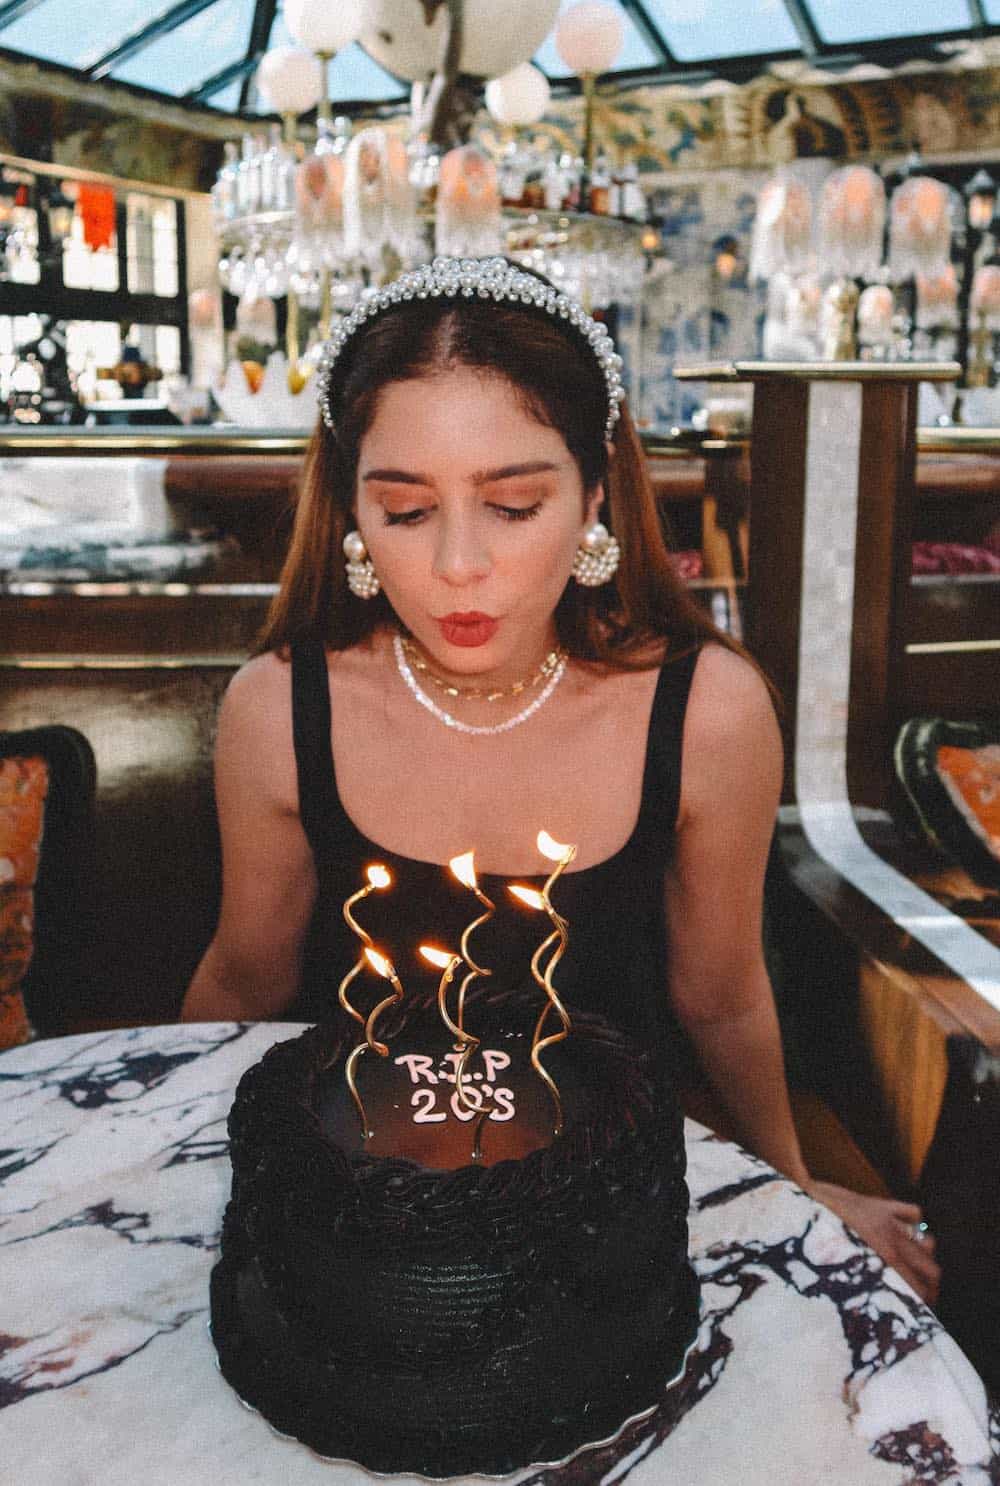 woman blowing out the candles of a cake with "RIP 20's" on it for a birthday photoshoot